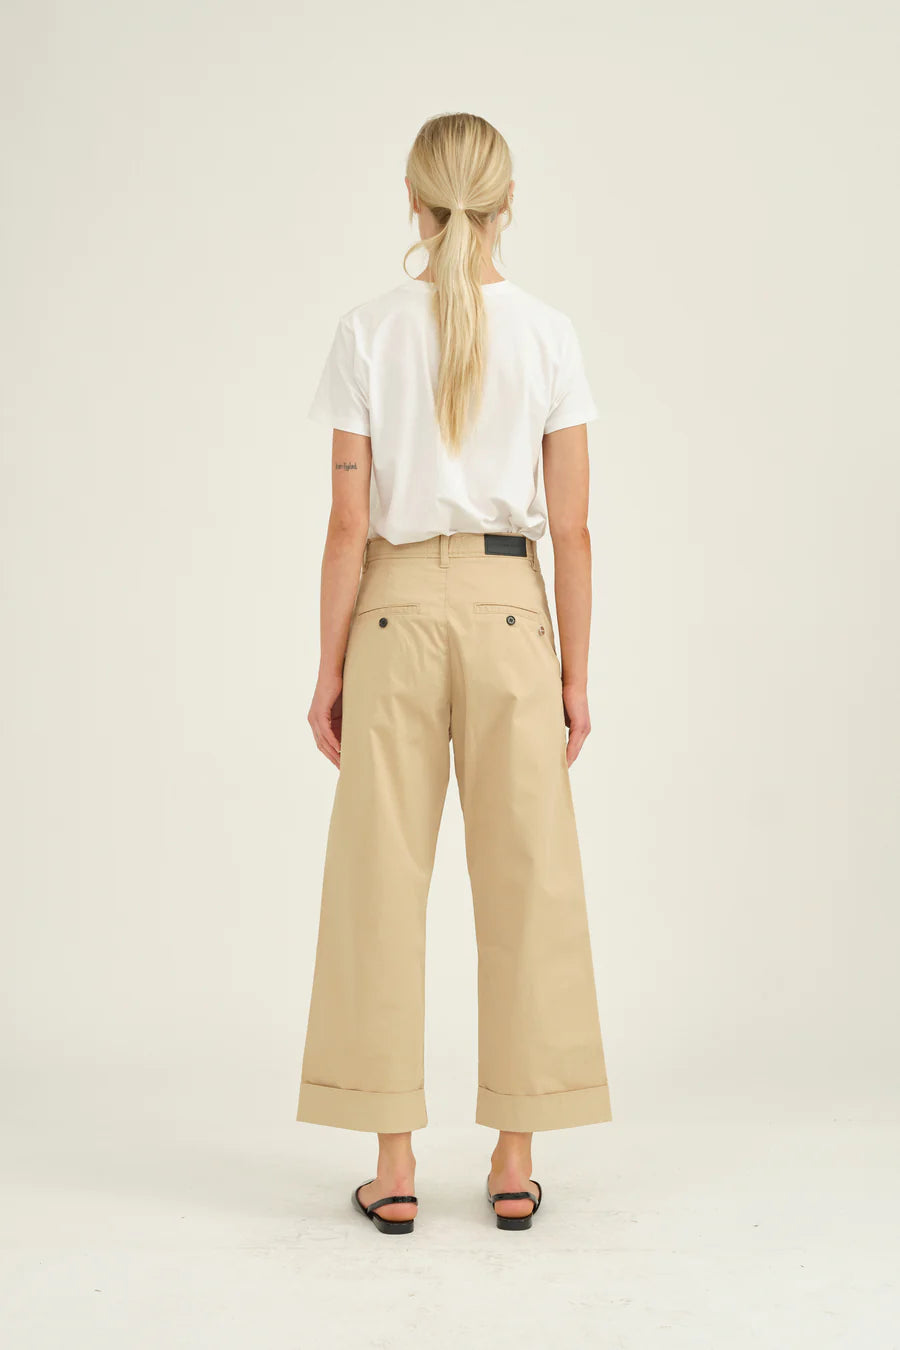 Beige straight leg chino cotton trousers with turnups